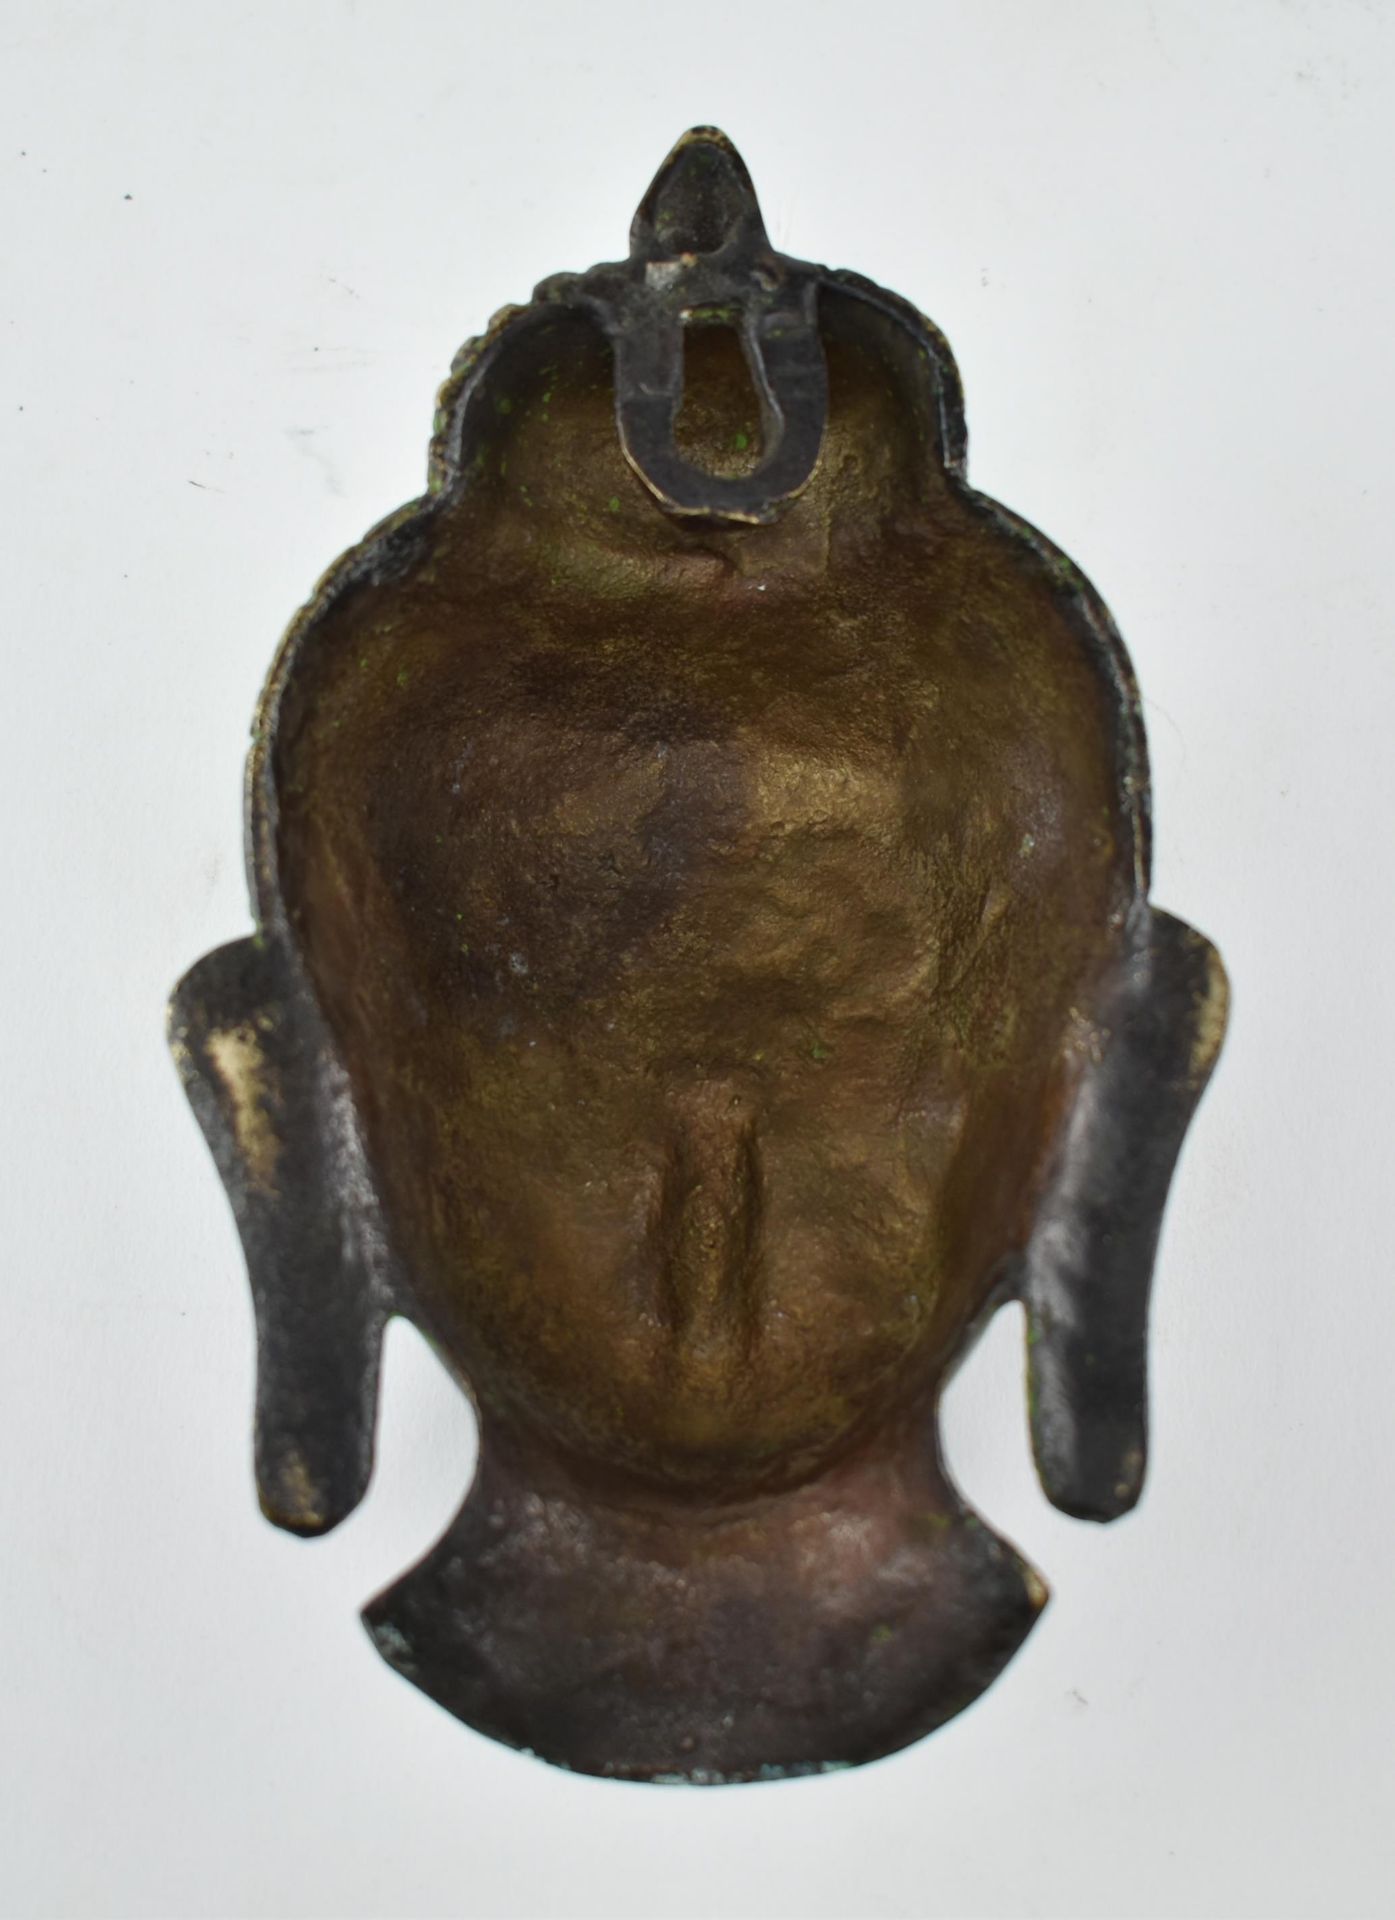 HEAVY BRONZE HEAD OF A BUDDHA WALL PLAQUE - Image 6 of 6